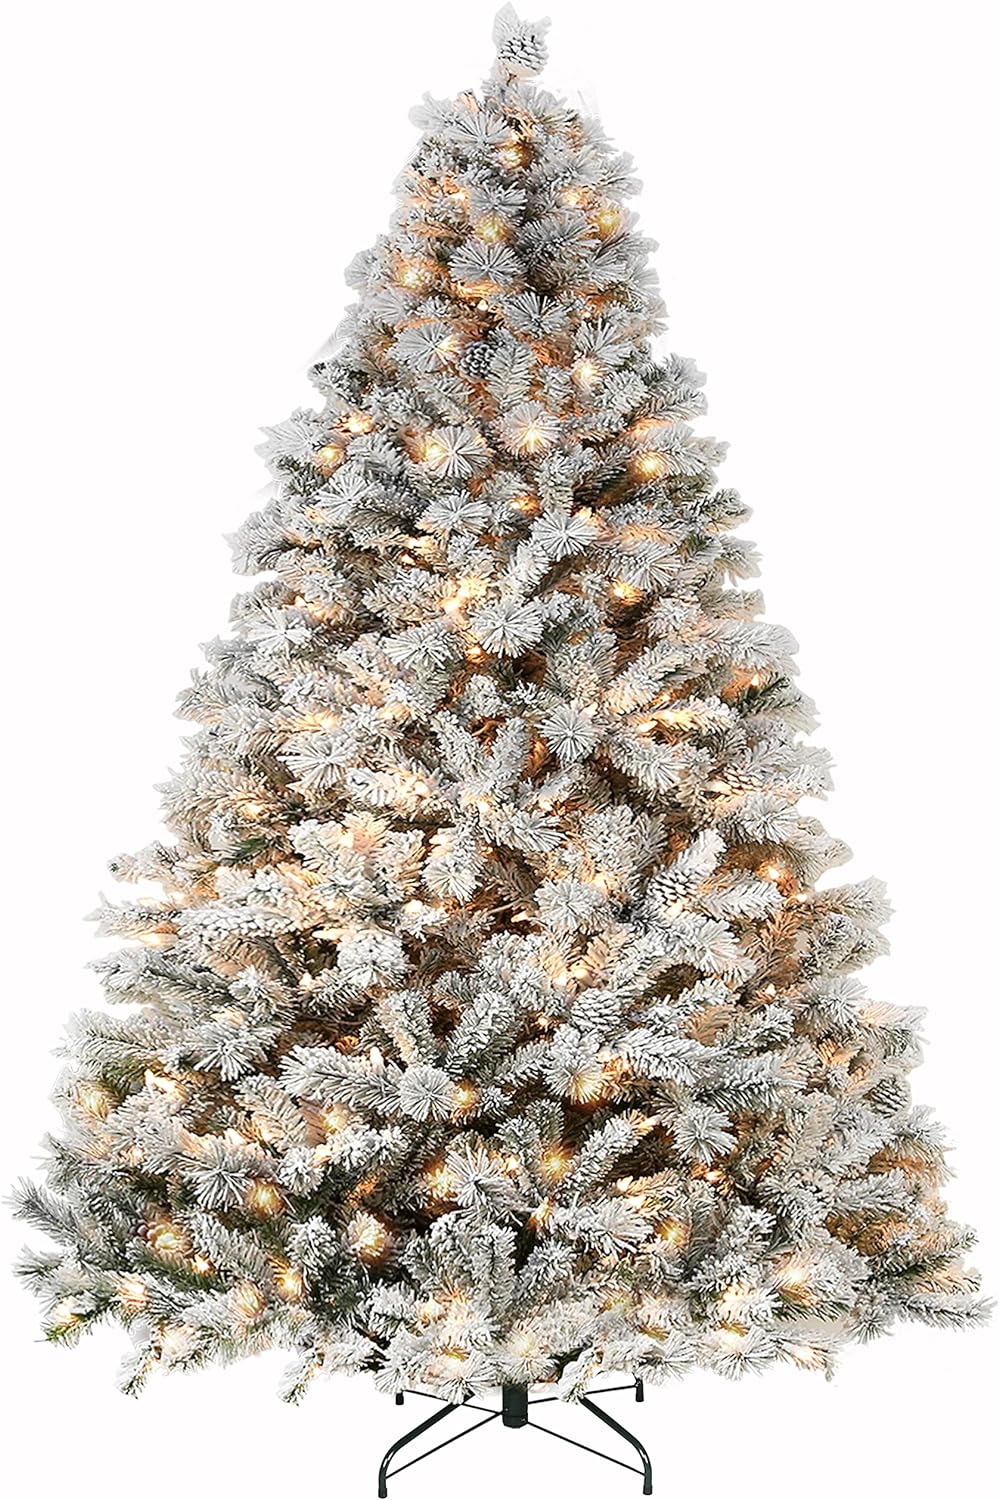 Hykolity 6ft Snow Flocked Christmas Tree, Artificial Christmas Tree with Pine Cones, 250 Warm White Lights, 762 Tips, Metal Stand and Hinged Branches